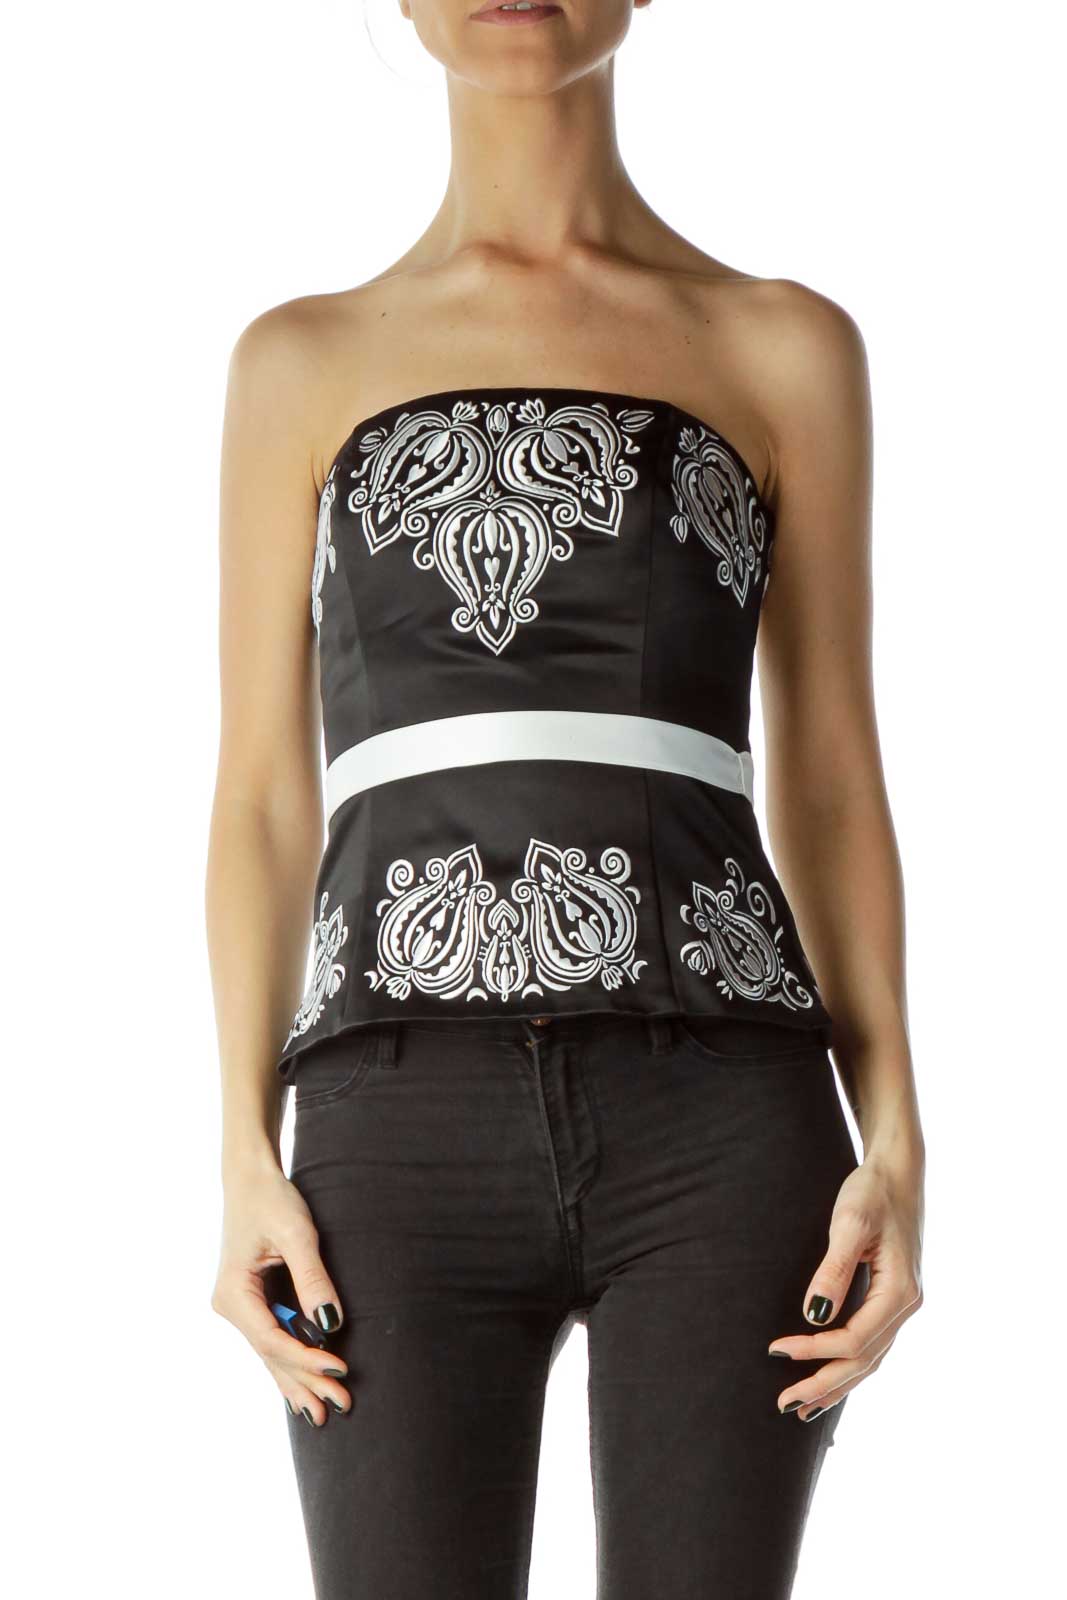 WHITE House Black Market WHBM Pleated Floral Bustier Corset Top, Size: 8